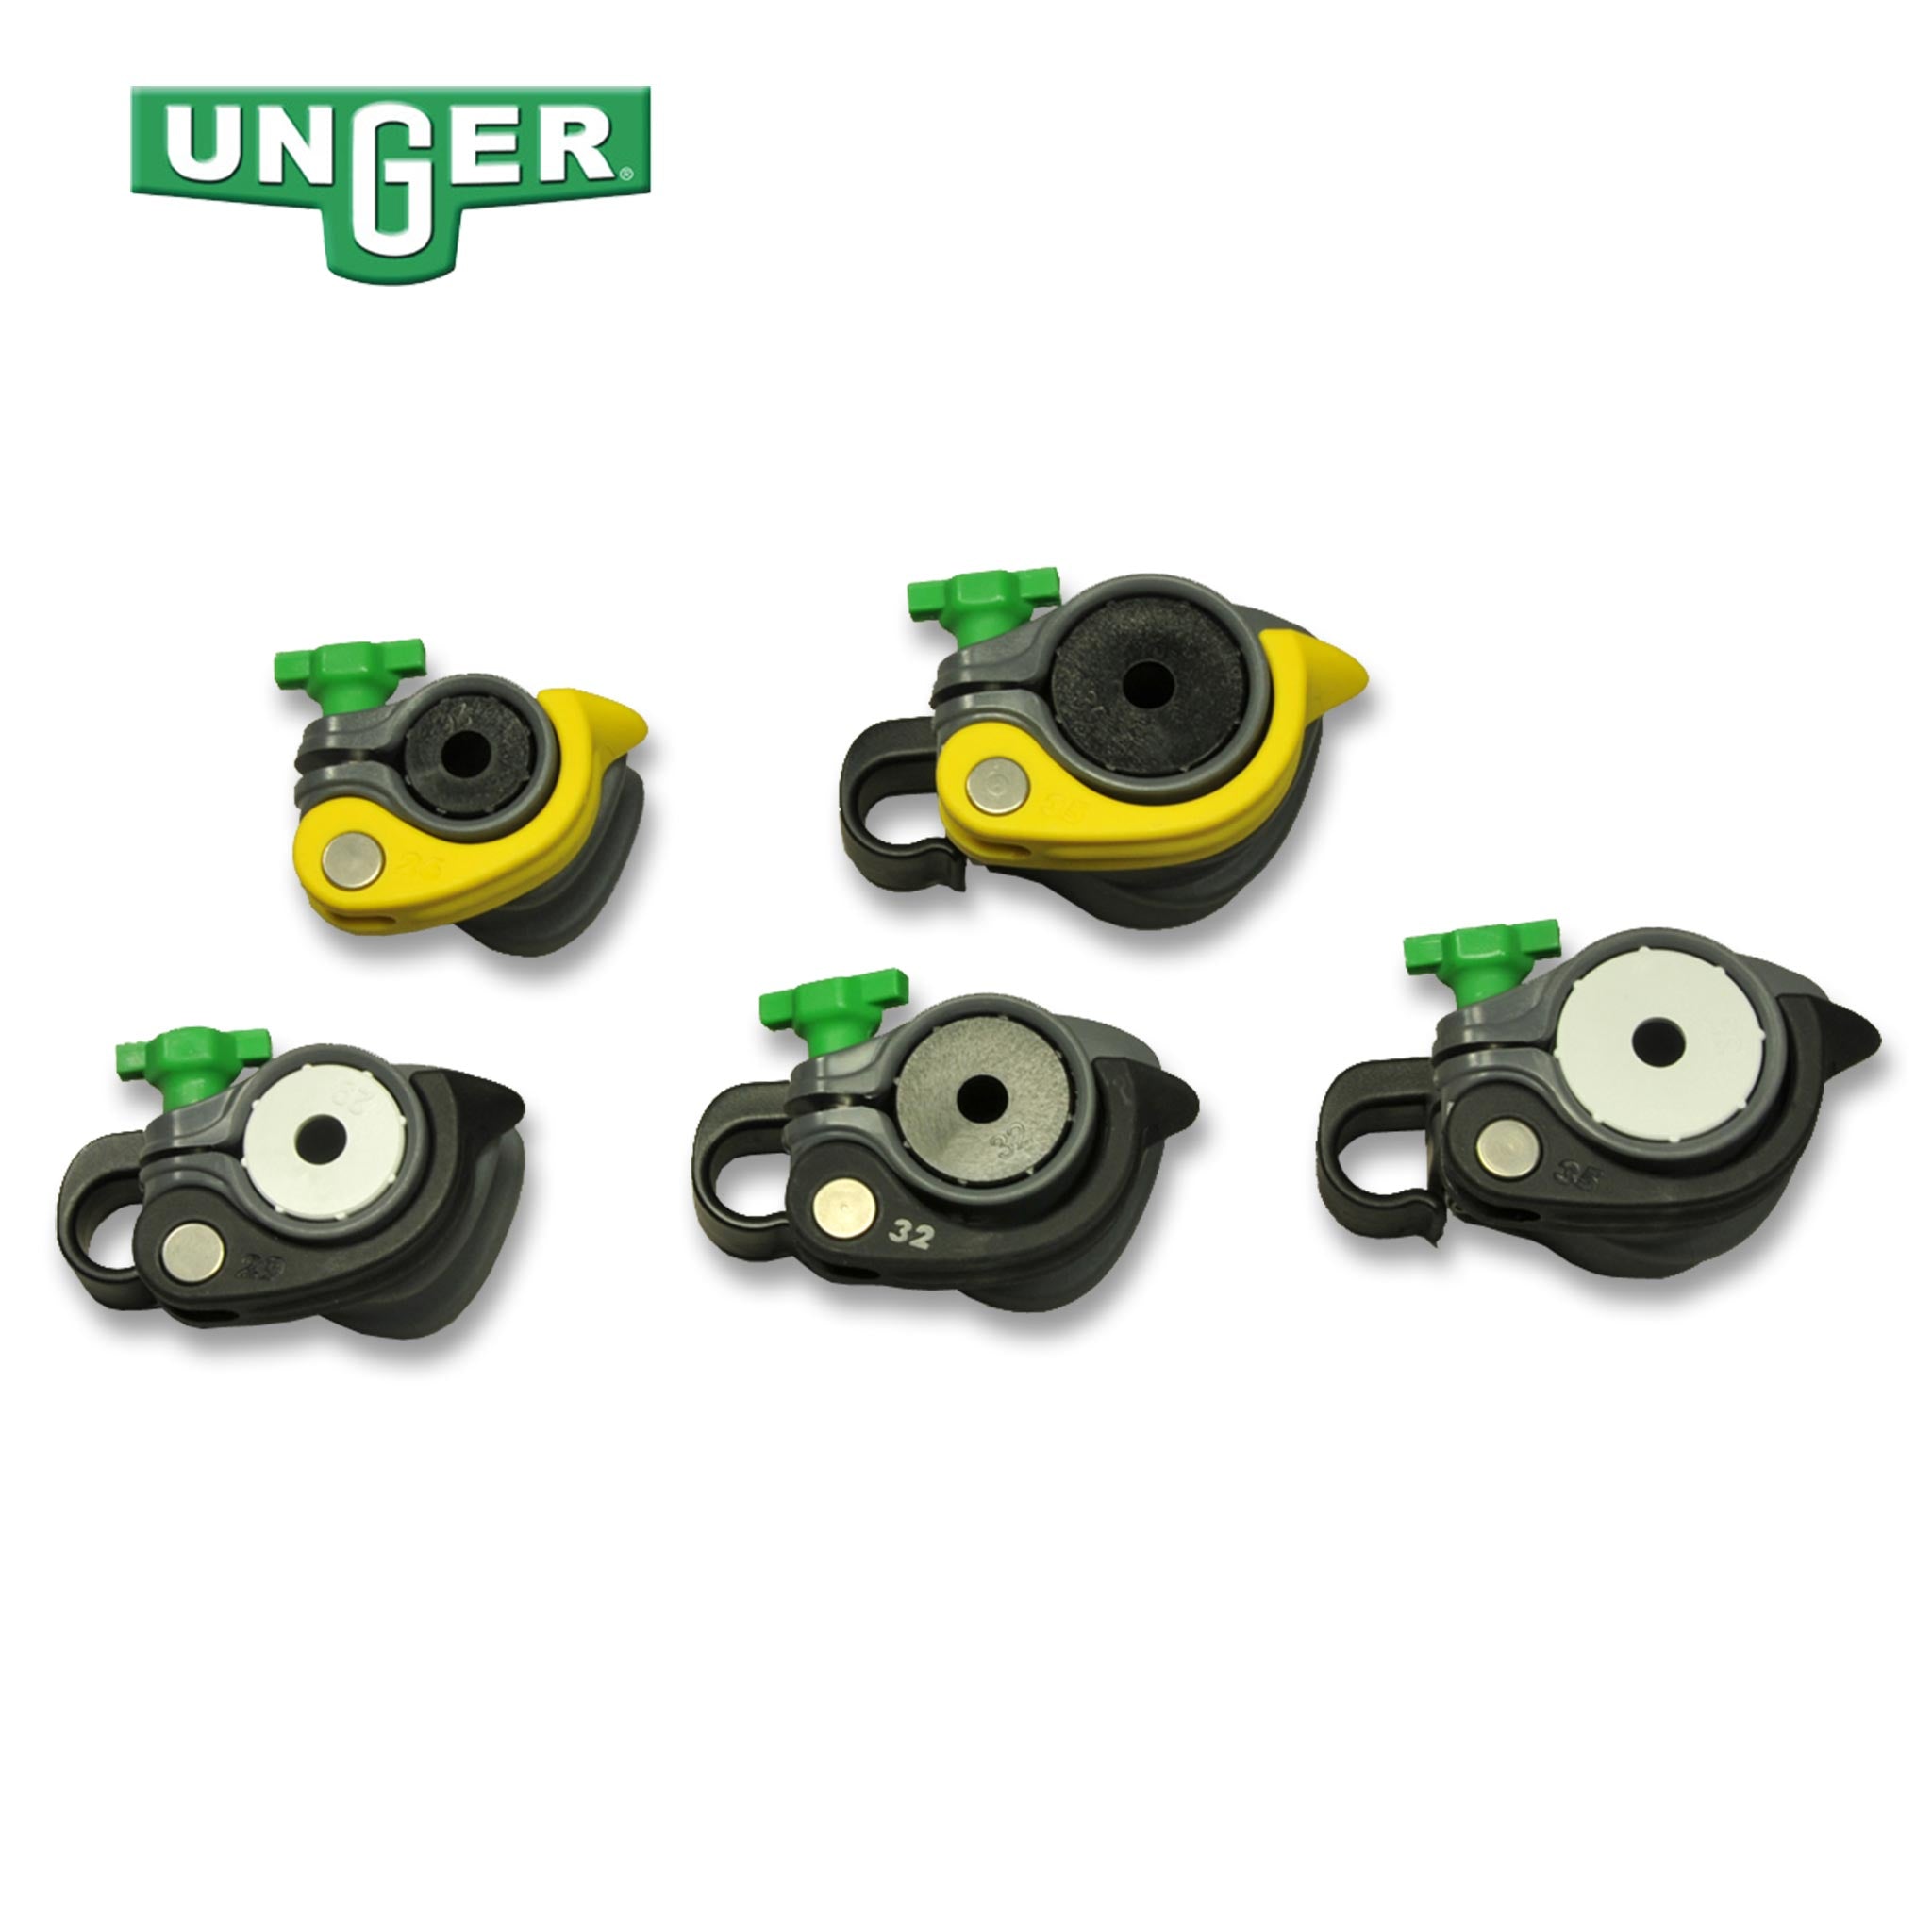 Unger nLite Pole Clamps